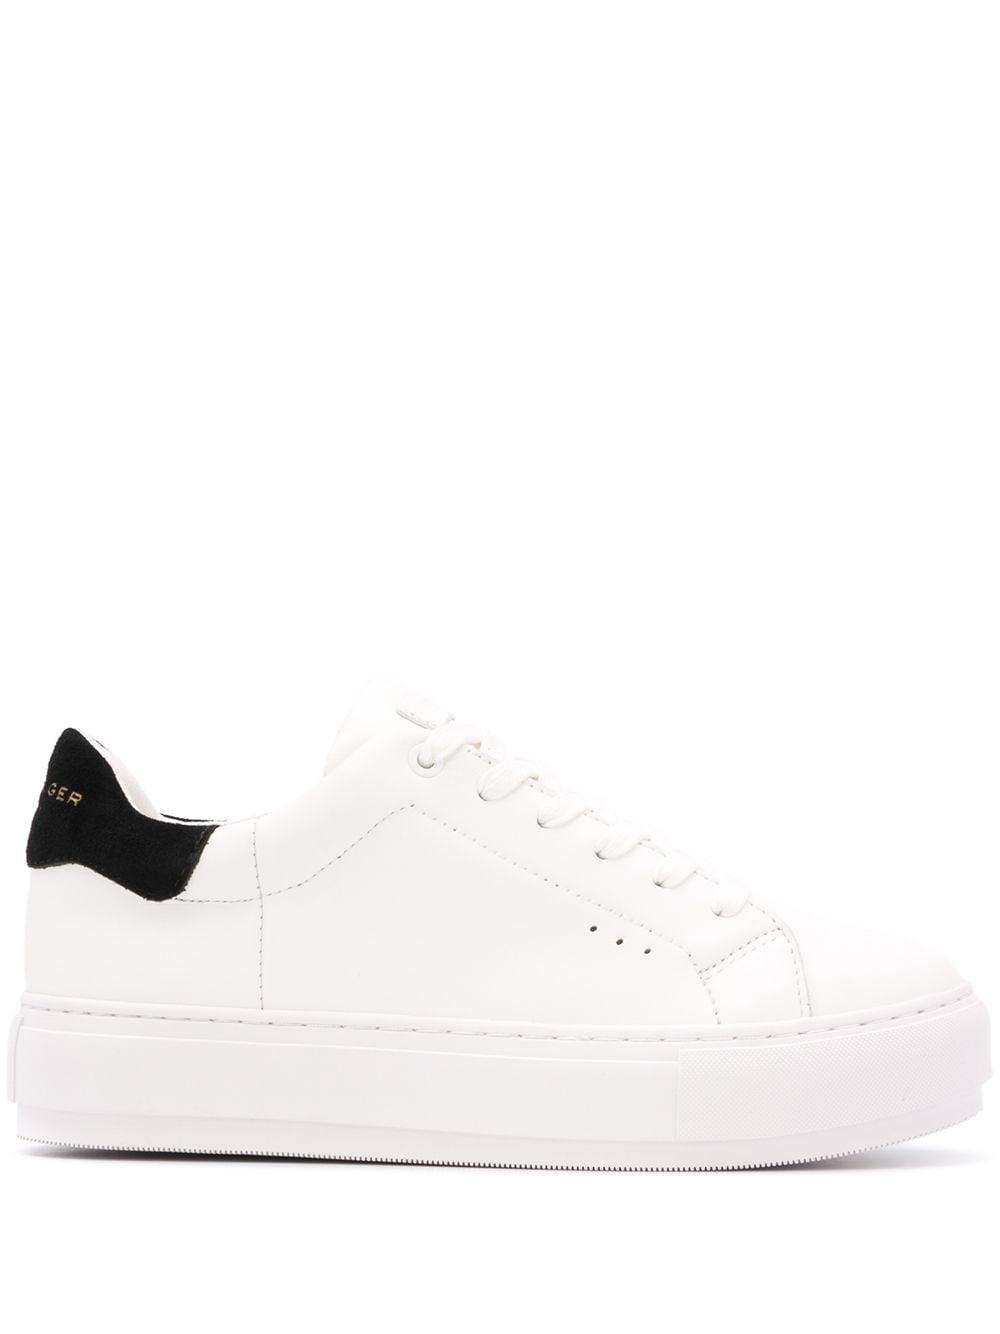 Kurt Geiger Leather Laney Flat Sneakers in White - Lyst